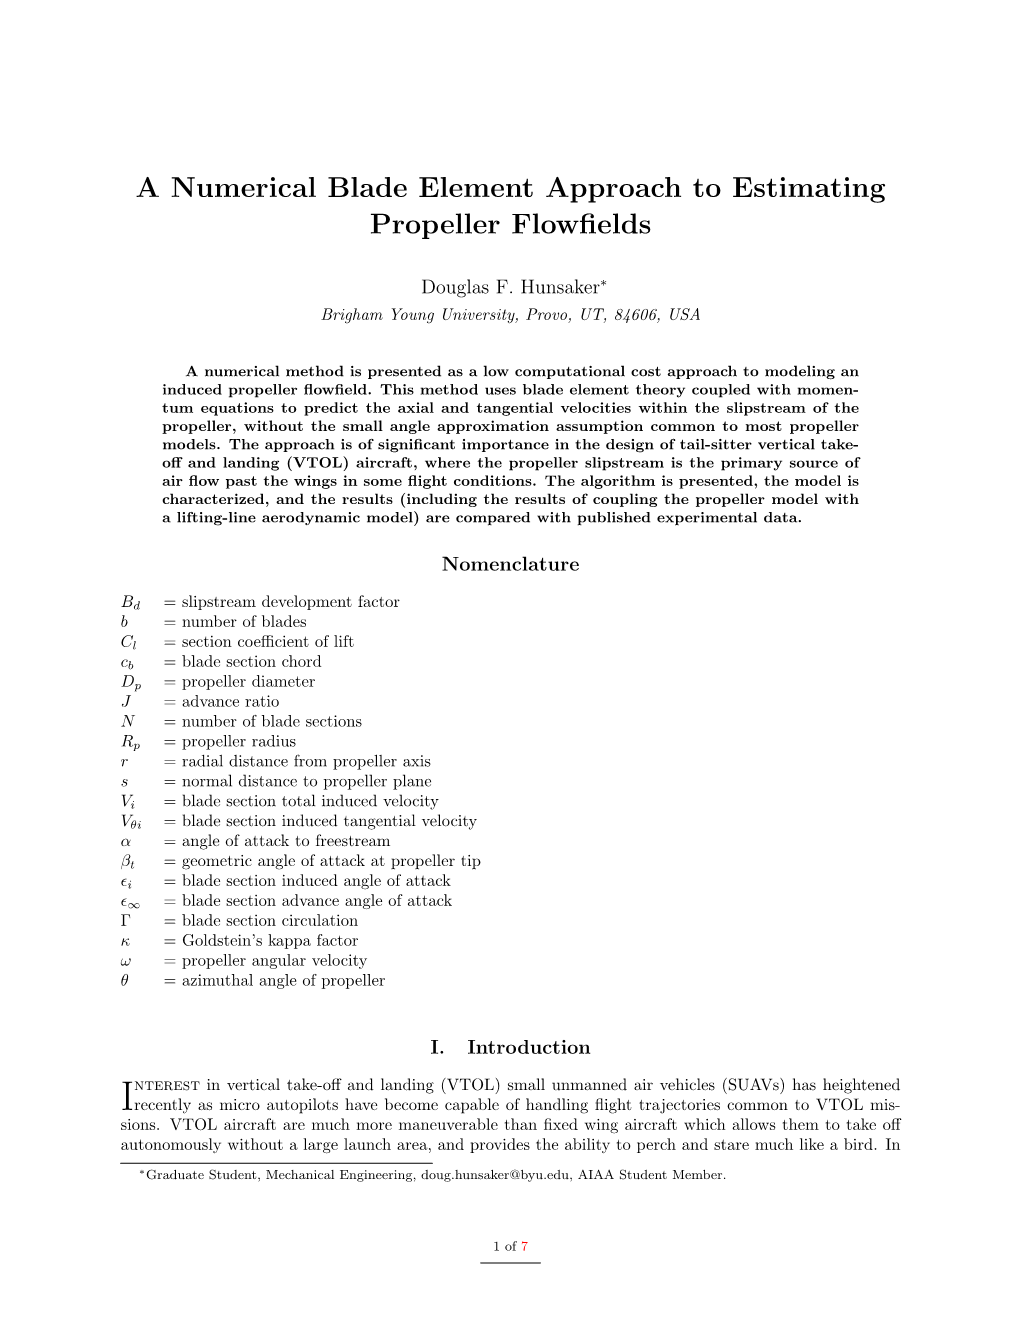 A Numerical Blade Element Approach to Estimating Propeller Flowfields